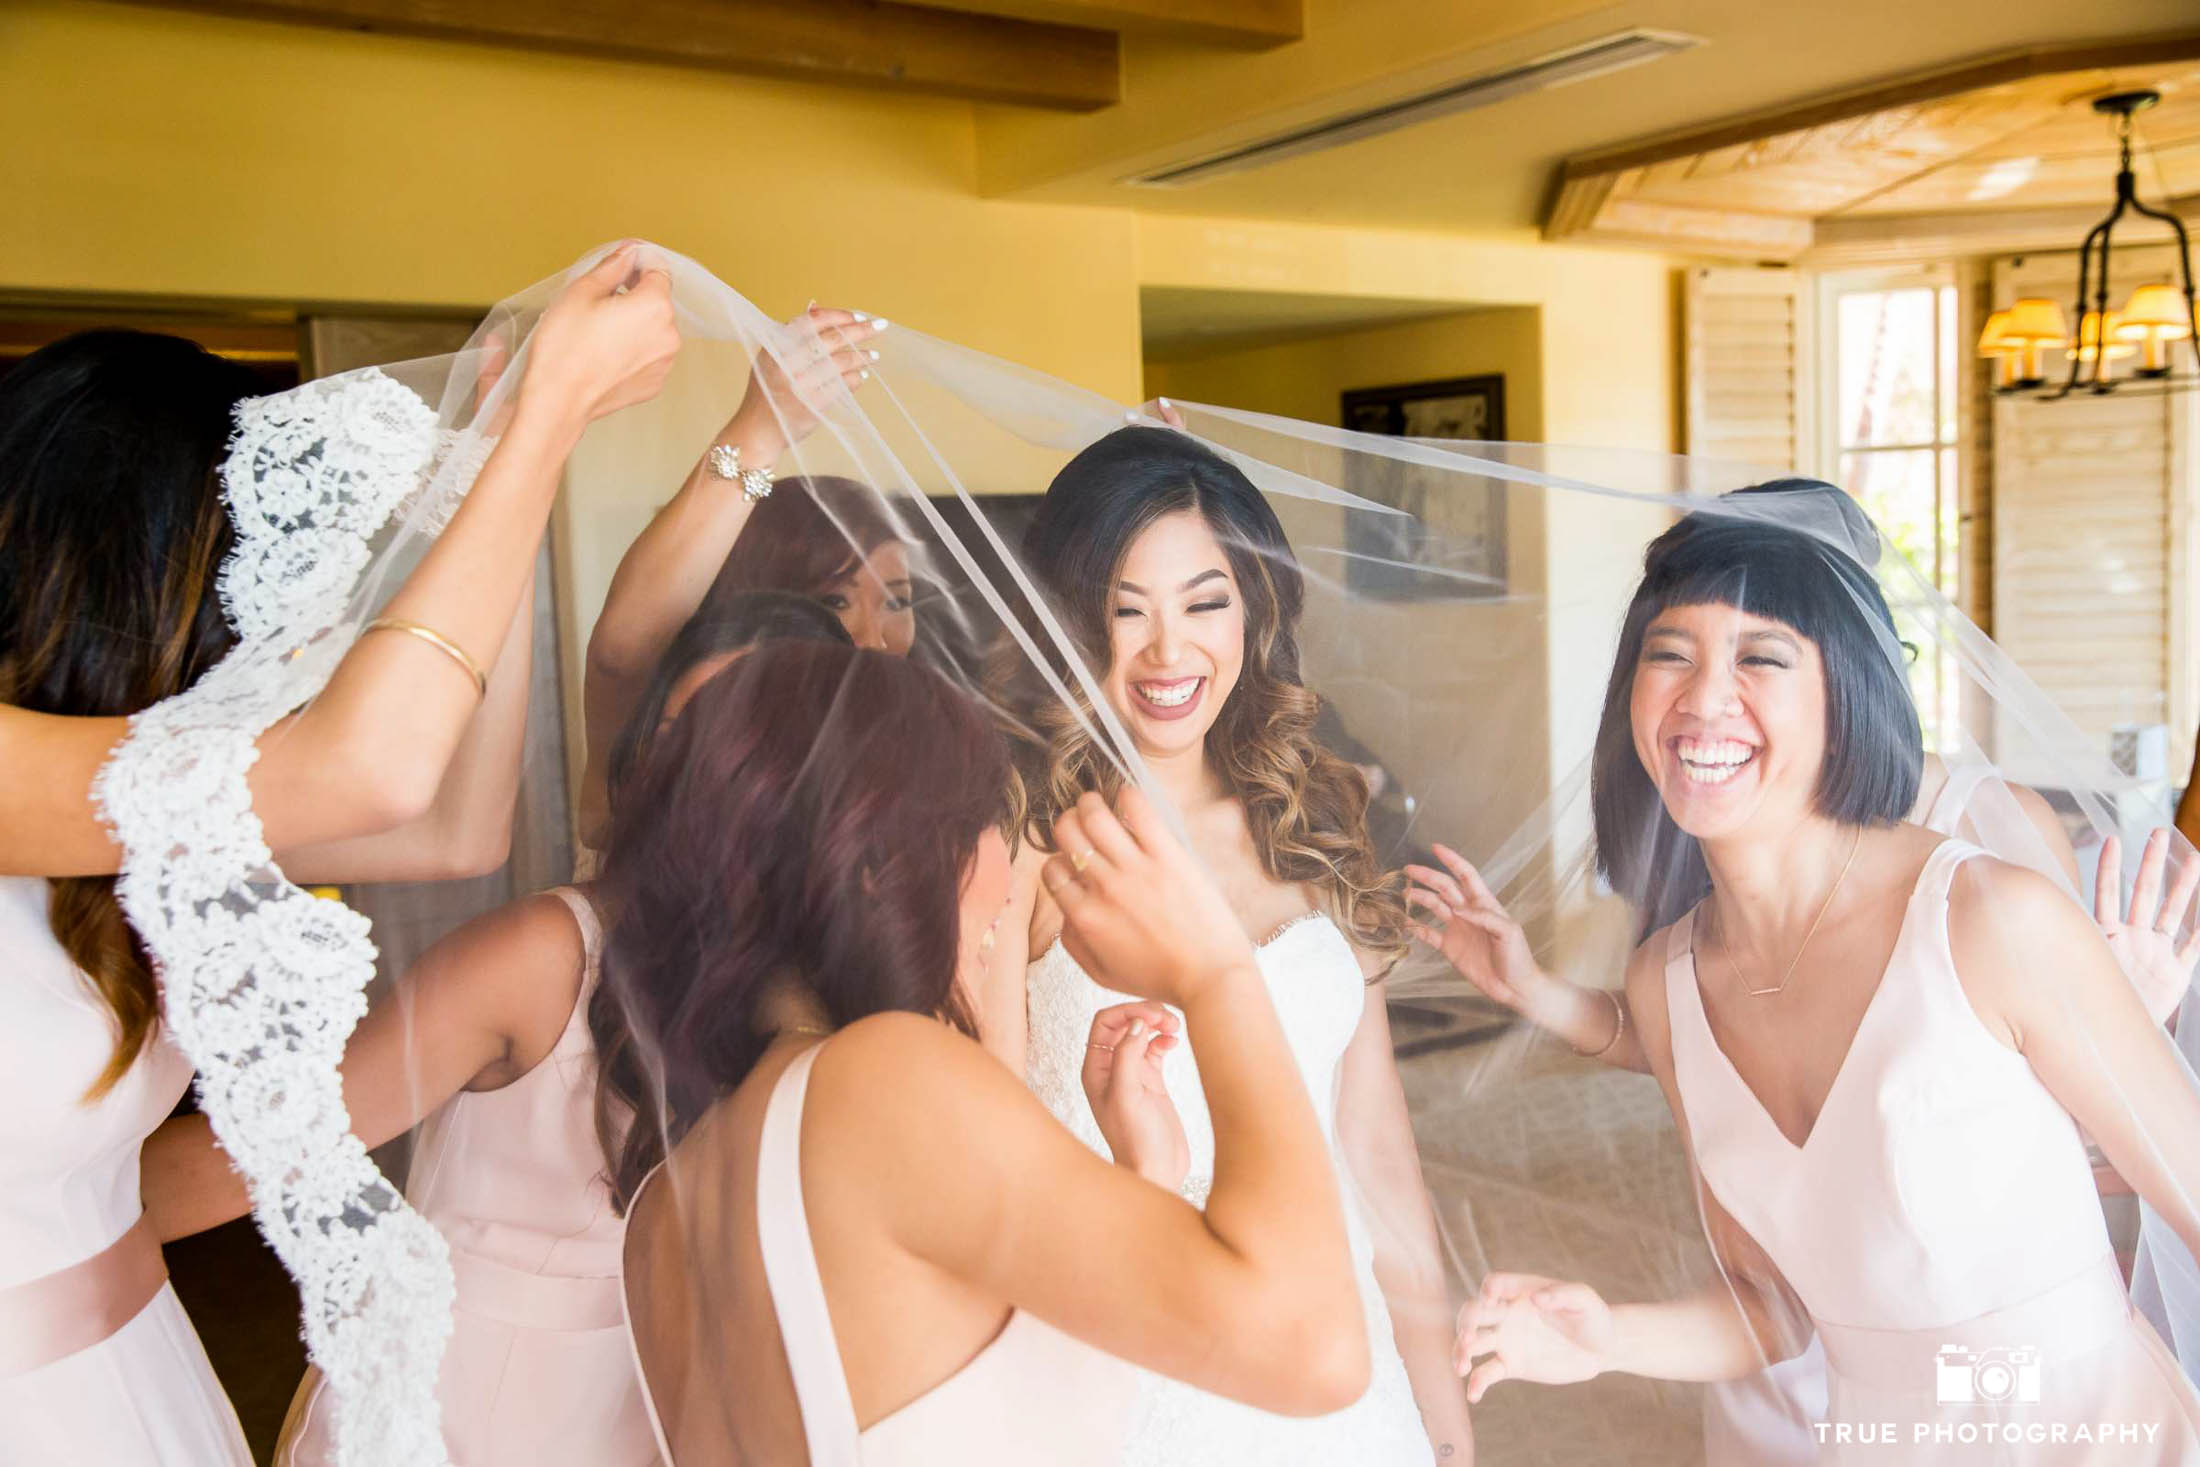 Bride and bridesmaids have fun while getting ready.